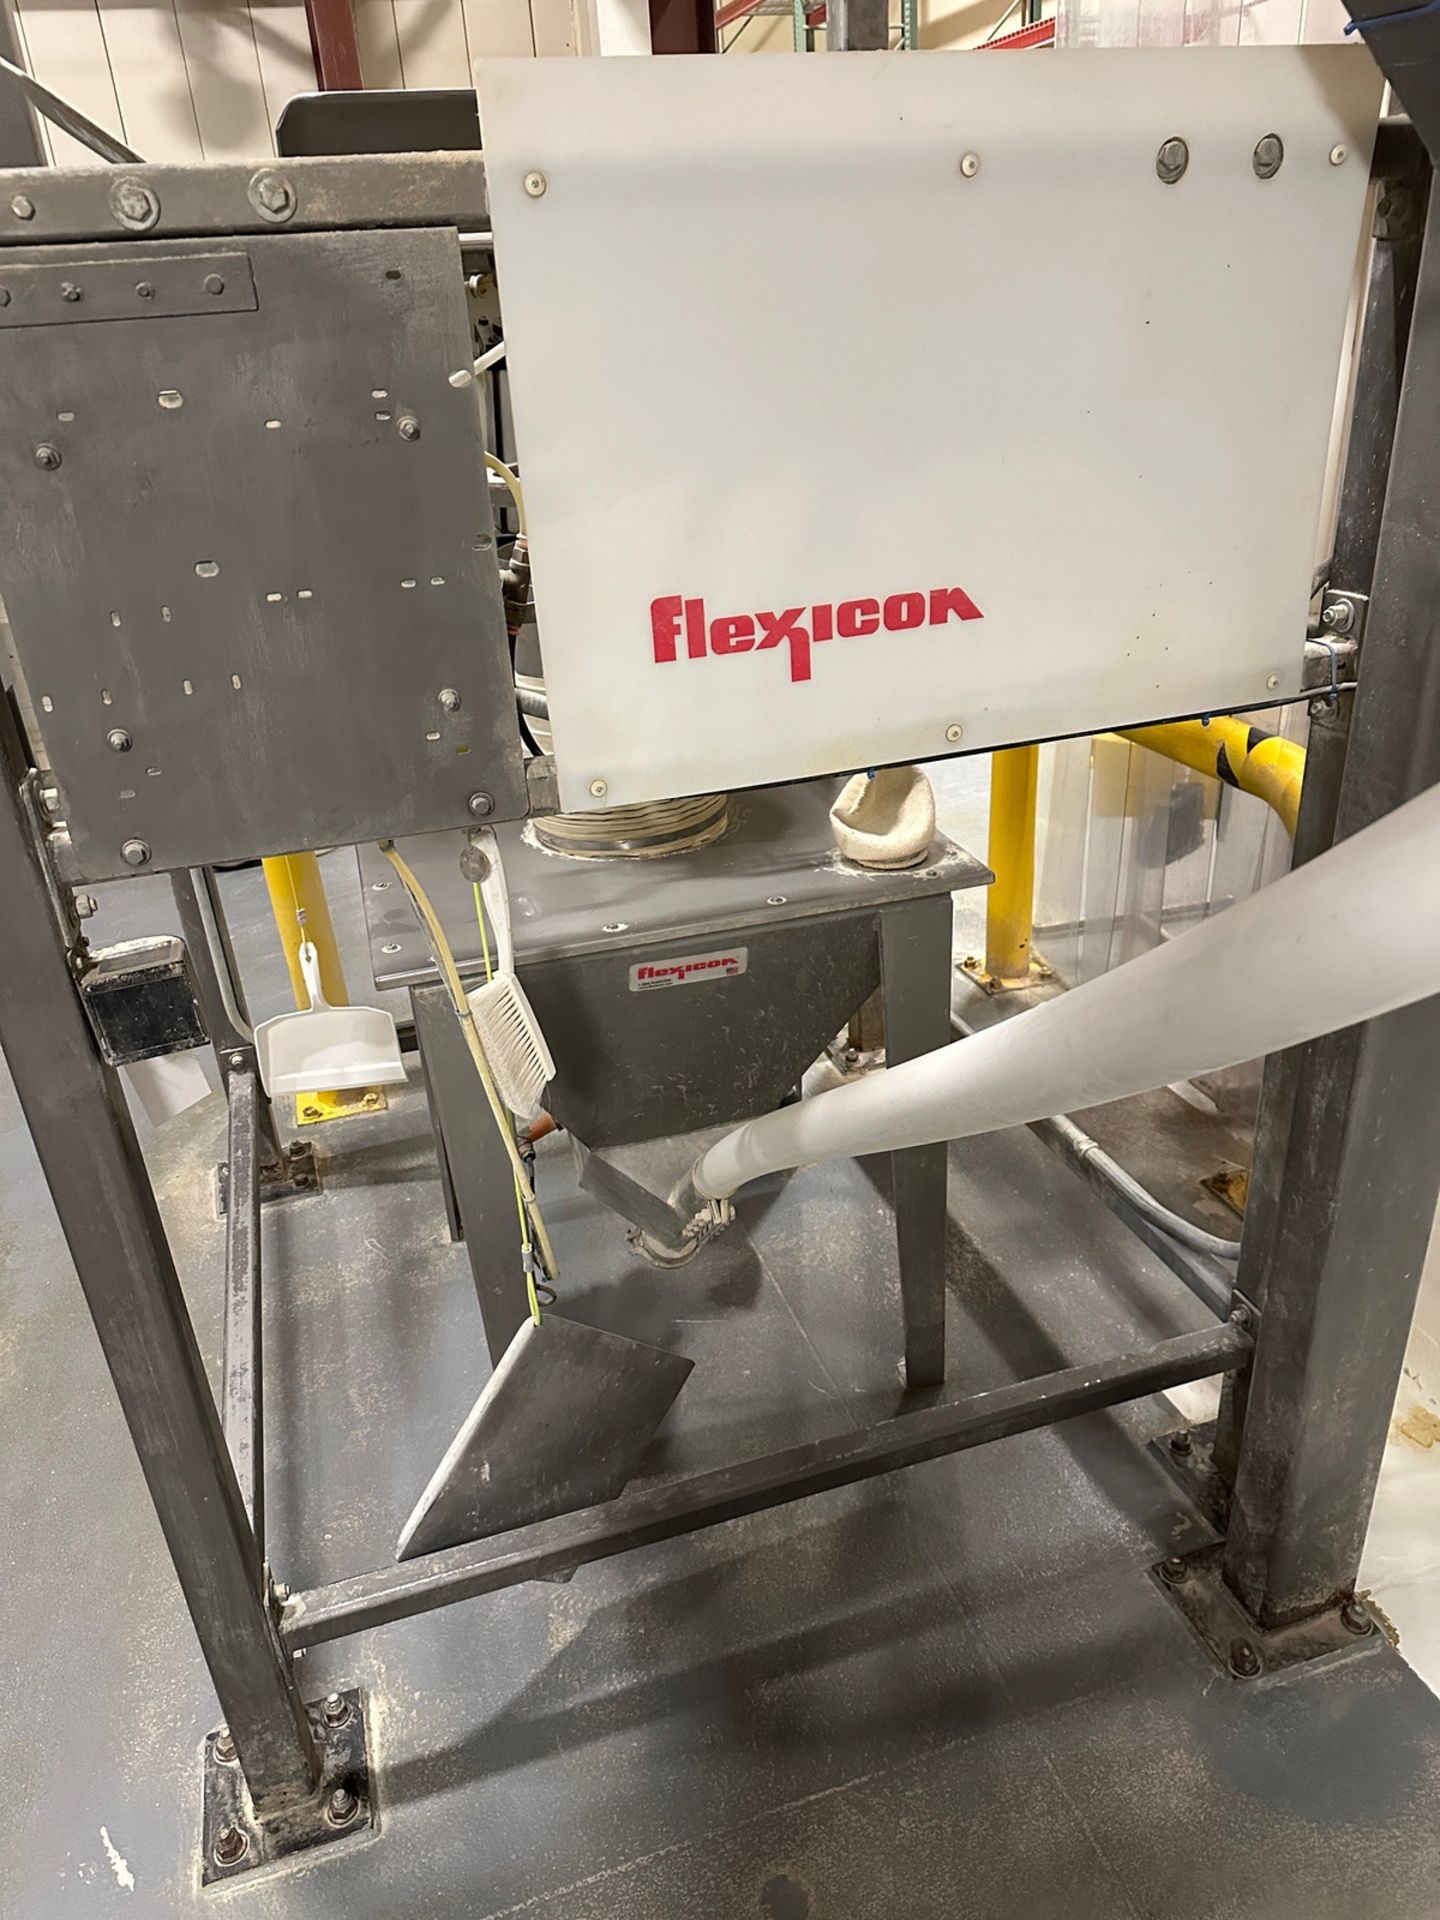 Flexicon Super Sac Unloading Station with Stainless Steel Hopper and Auger Drive - Image 5 of 6